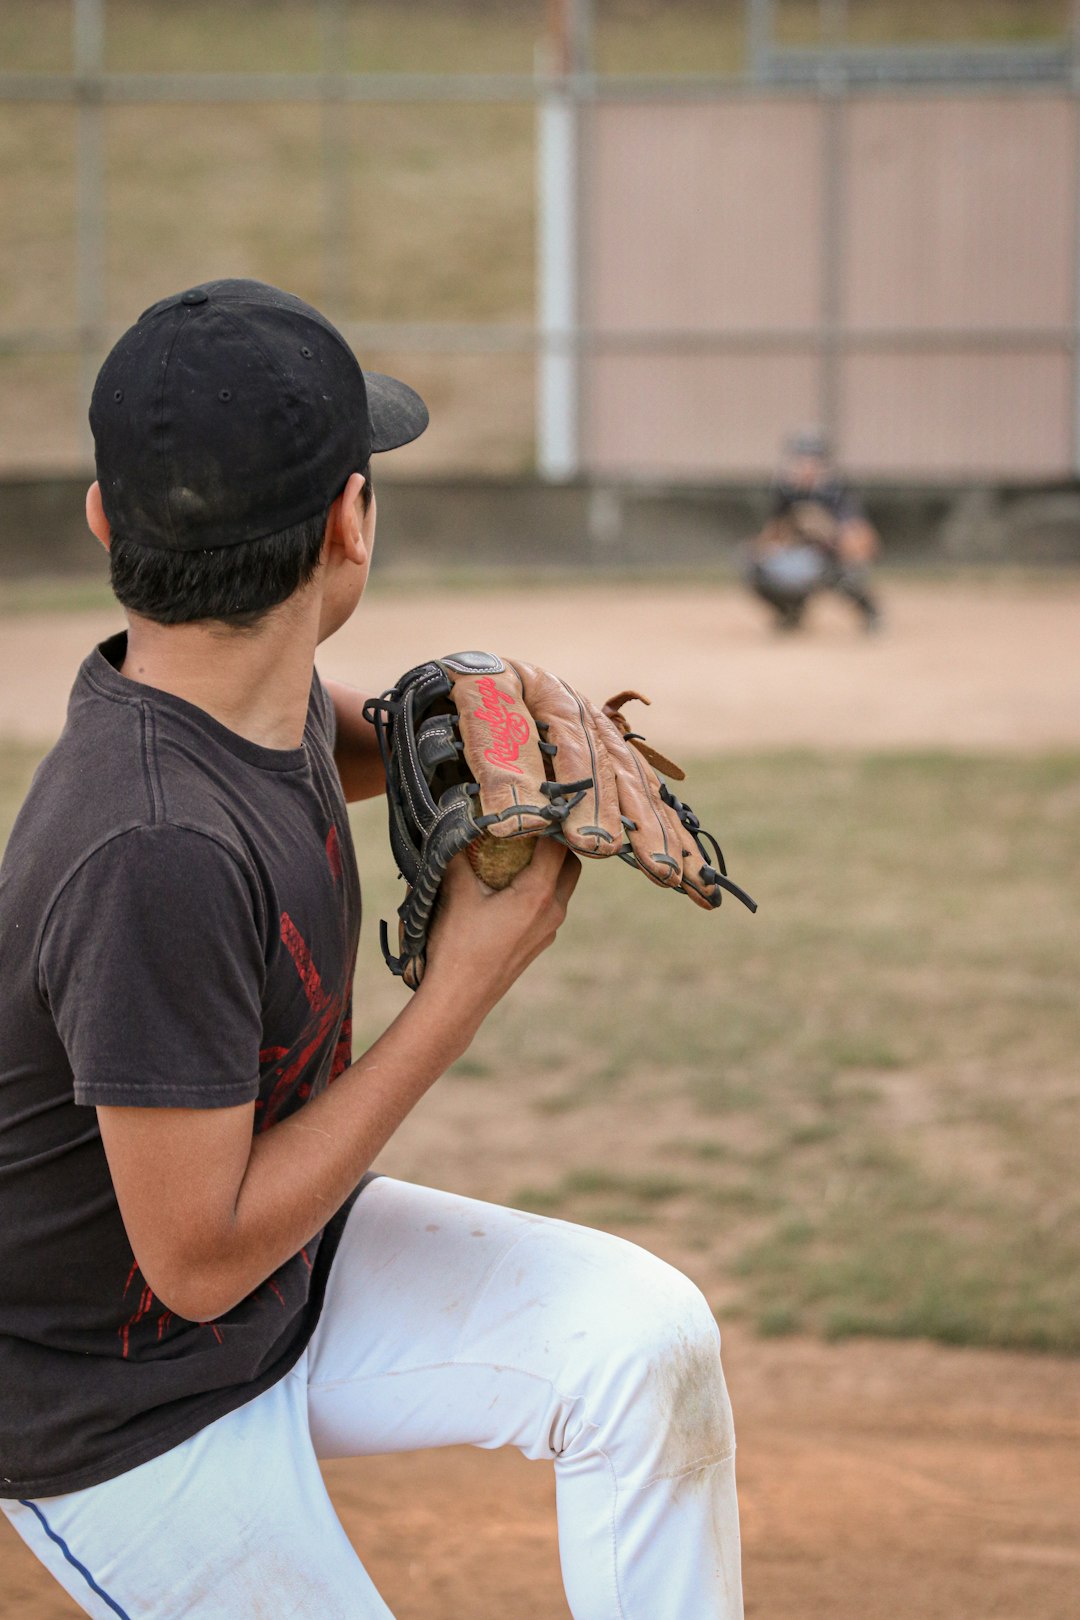 How Much Does Travel Baseball Cost? | Syndication Cloud